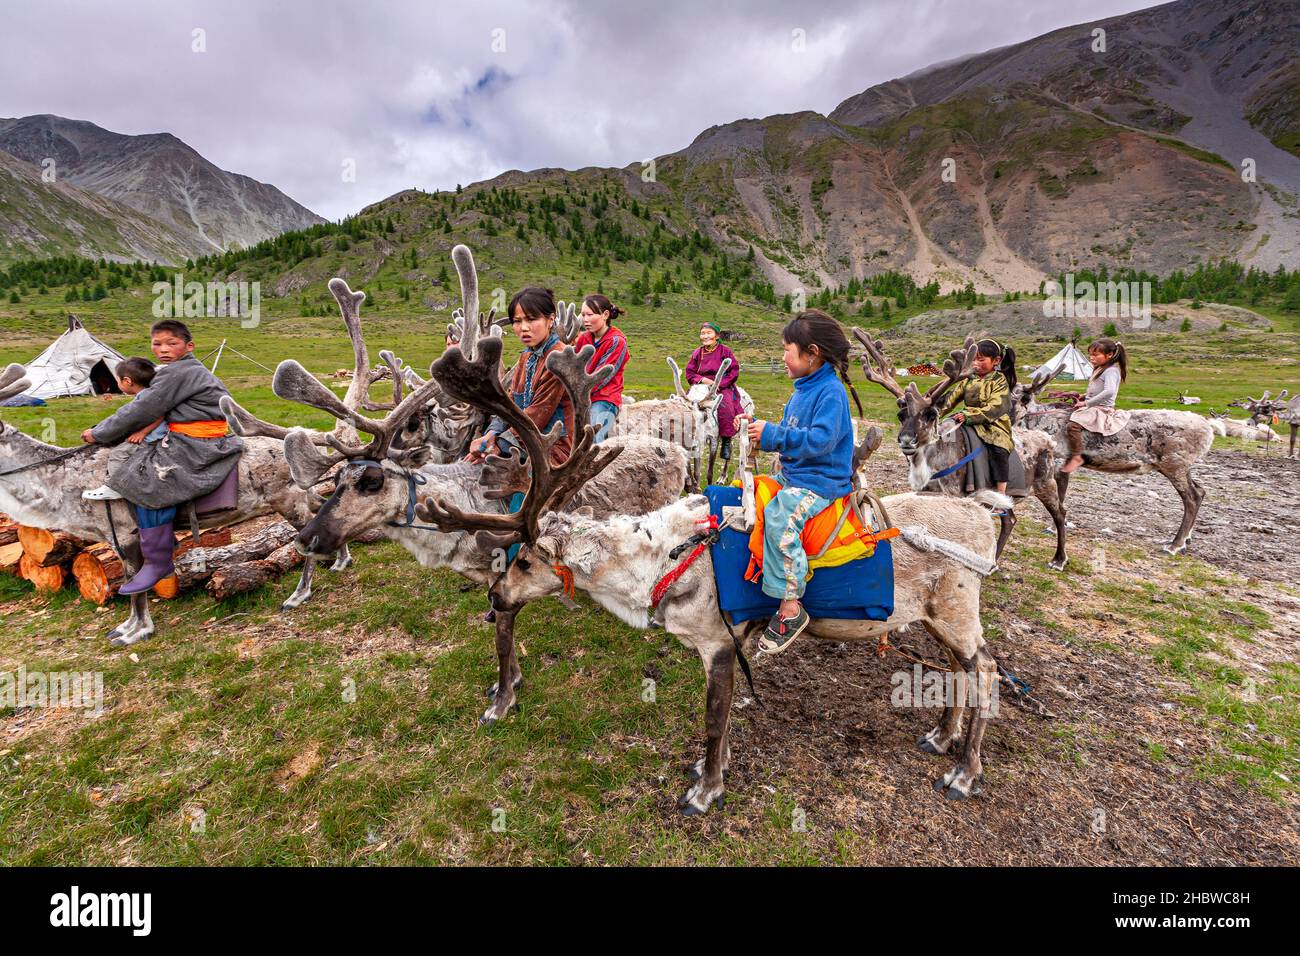 Turkic community of Semi Nomadic reindeer herders living in the northernmost province of Mongolia Stock Photo